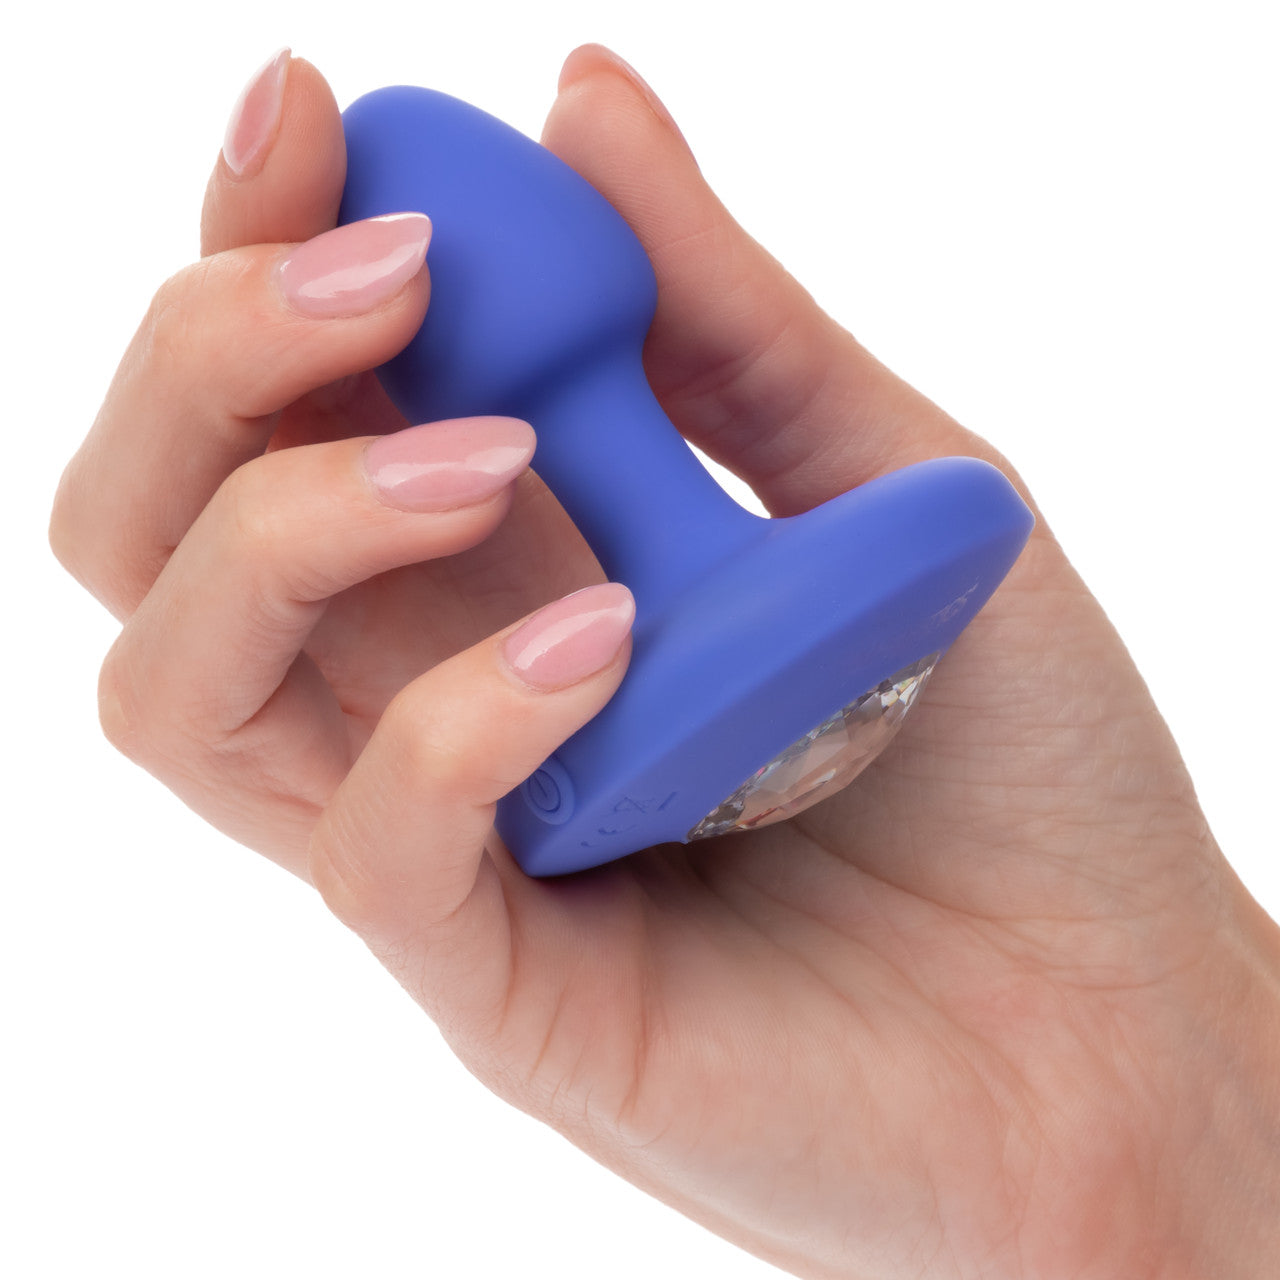 Cheeky Gems Small Rechargeable Vibrating Probe - Blue - Thorn & Feather